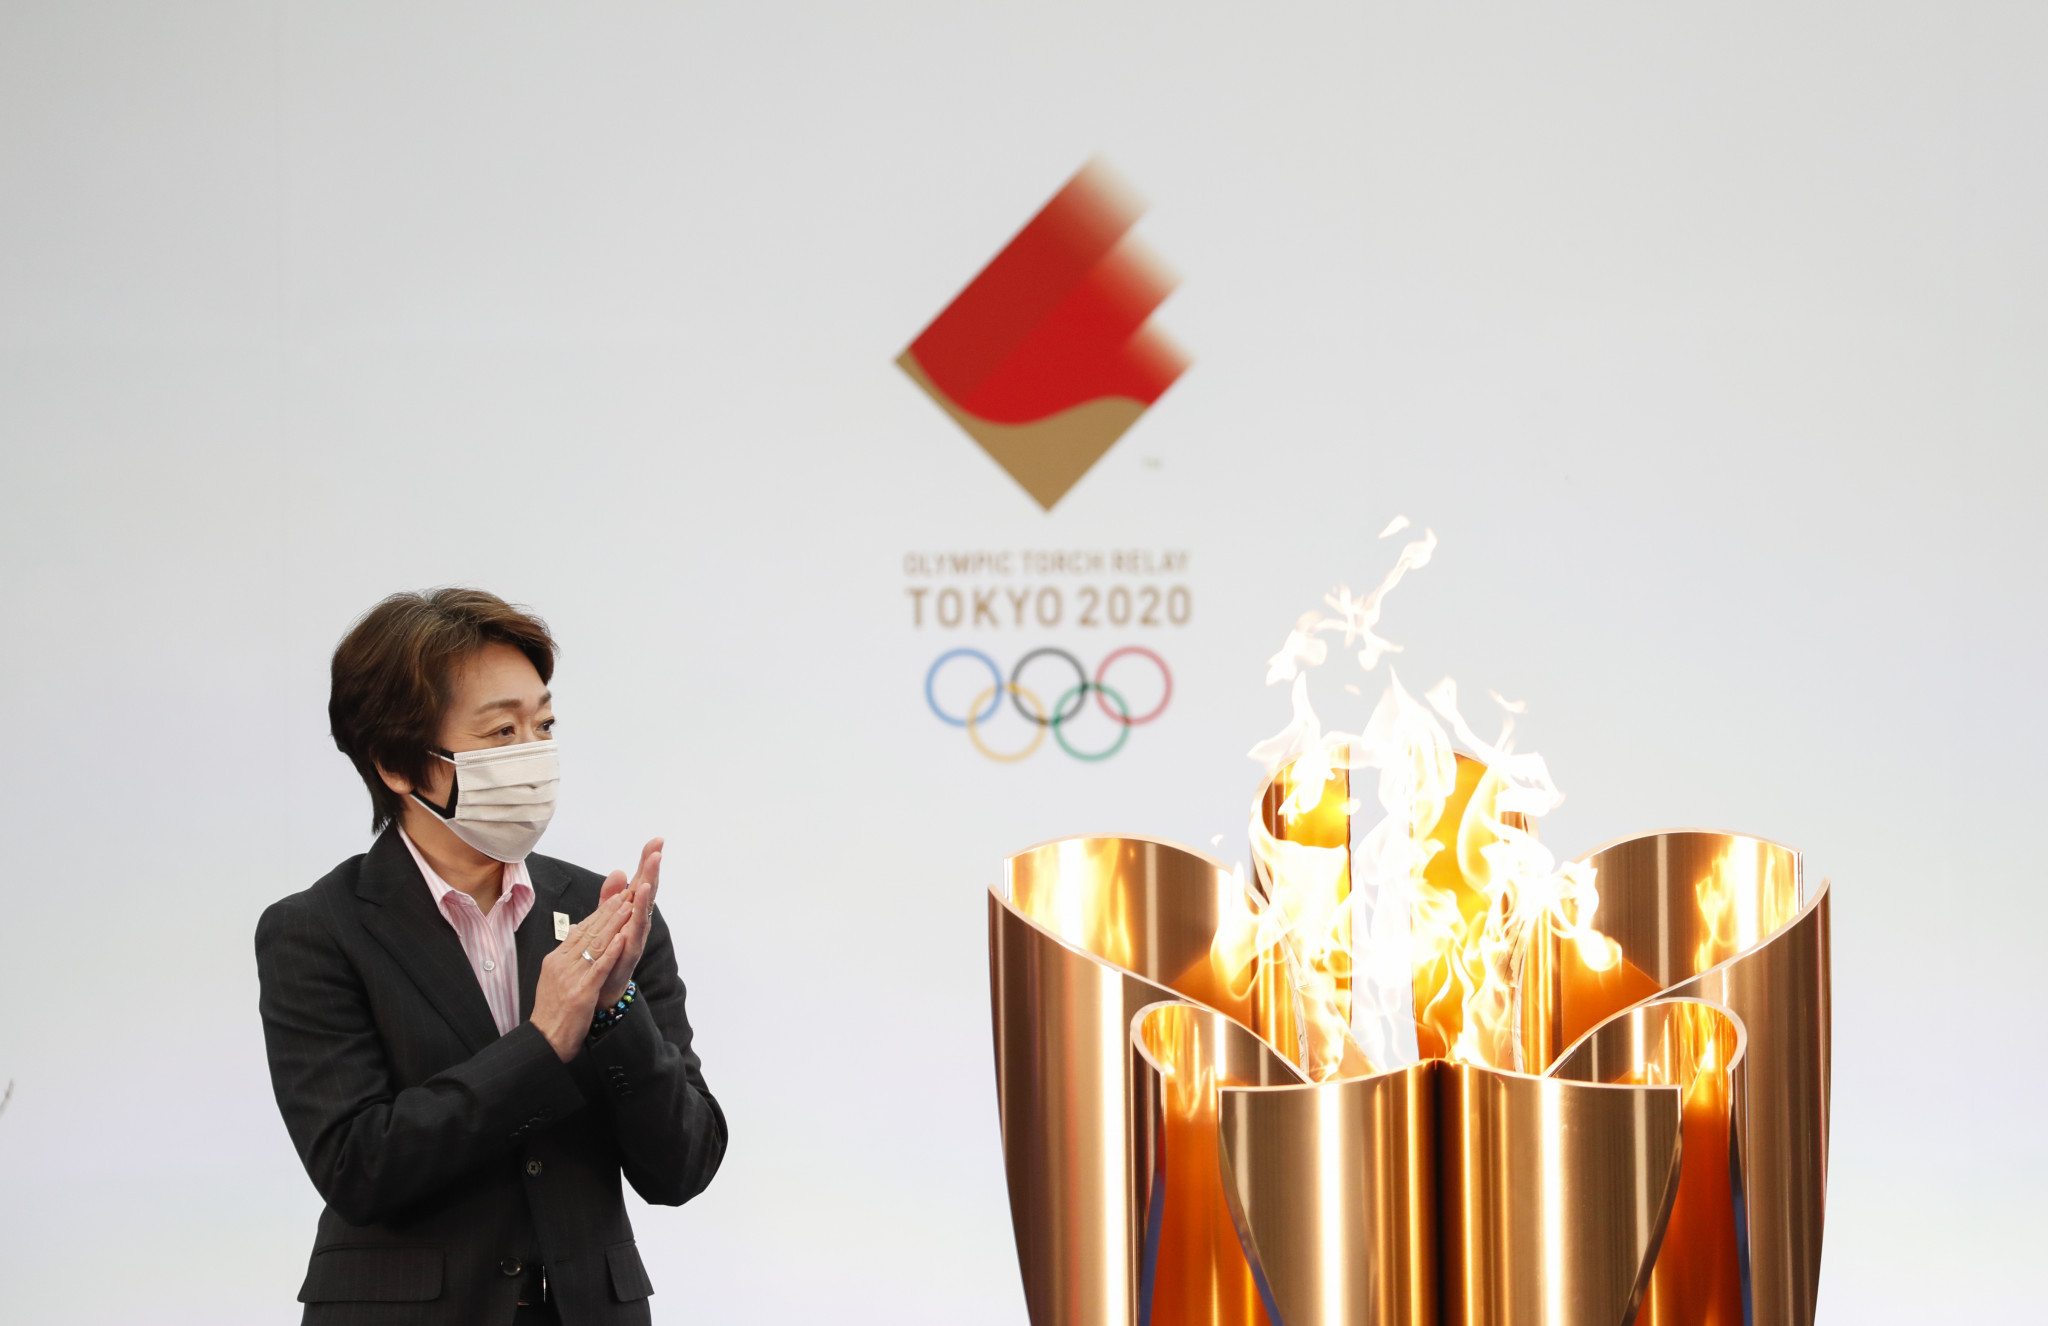 Tokyo 2020 President Seiko Hashimoto has yet to make a decision on whether to cancel the Osaka leg of the Olympic Torch Relay after new coronavirus restrictions were introduced in the city ©Getty Images